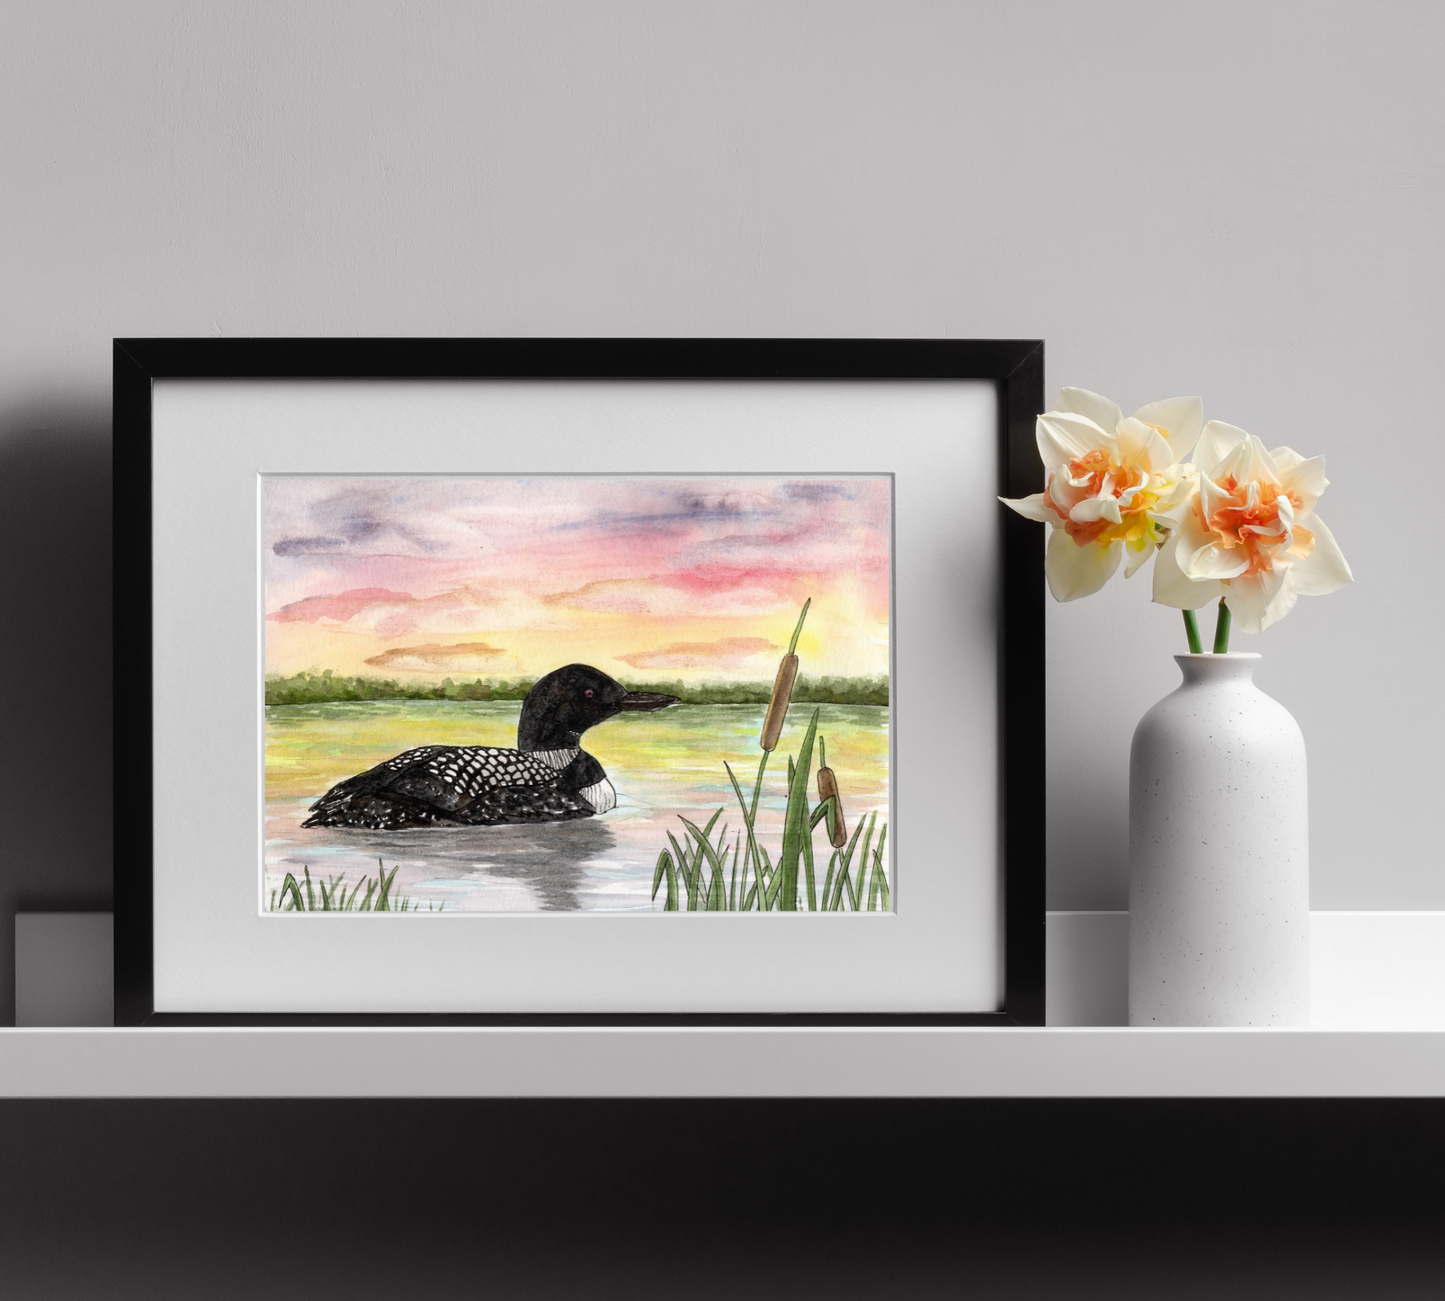 Loon at Sunset - Pen and Watercolor Painting - Archival Quality Art Print